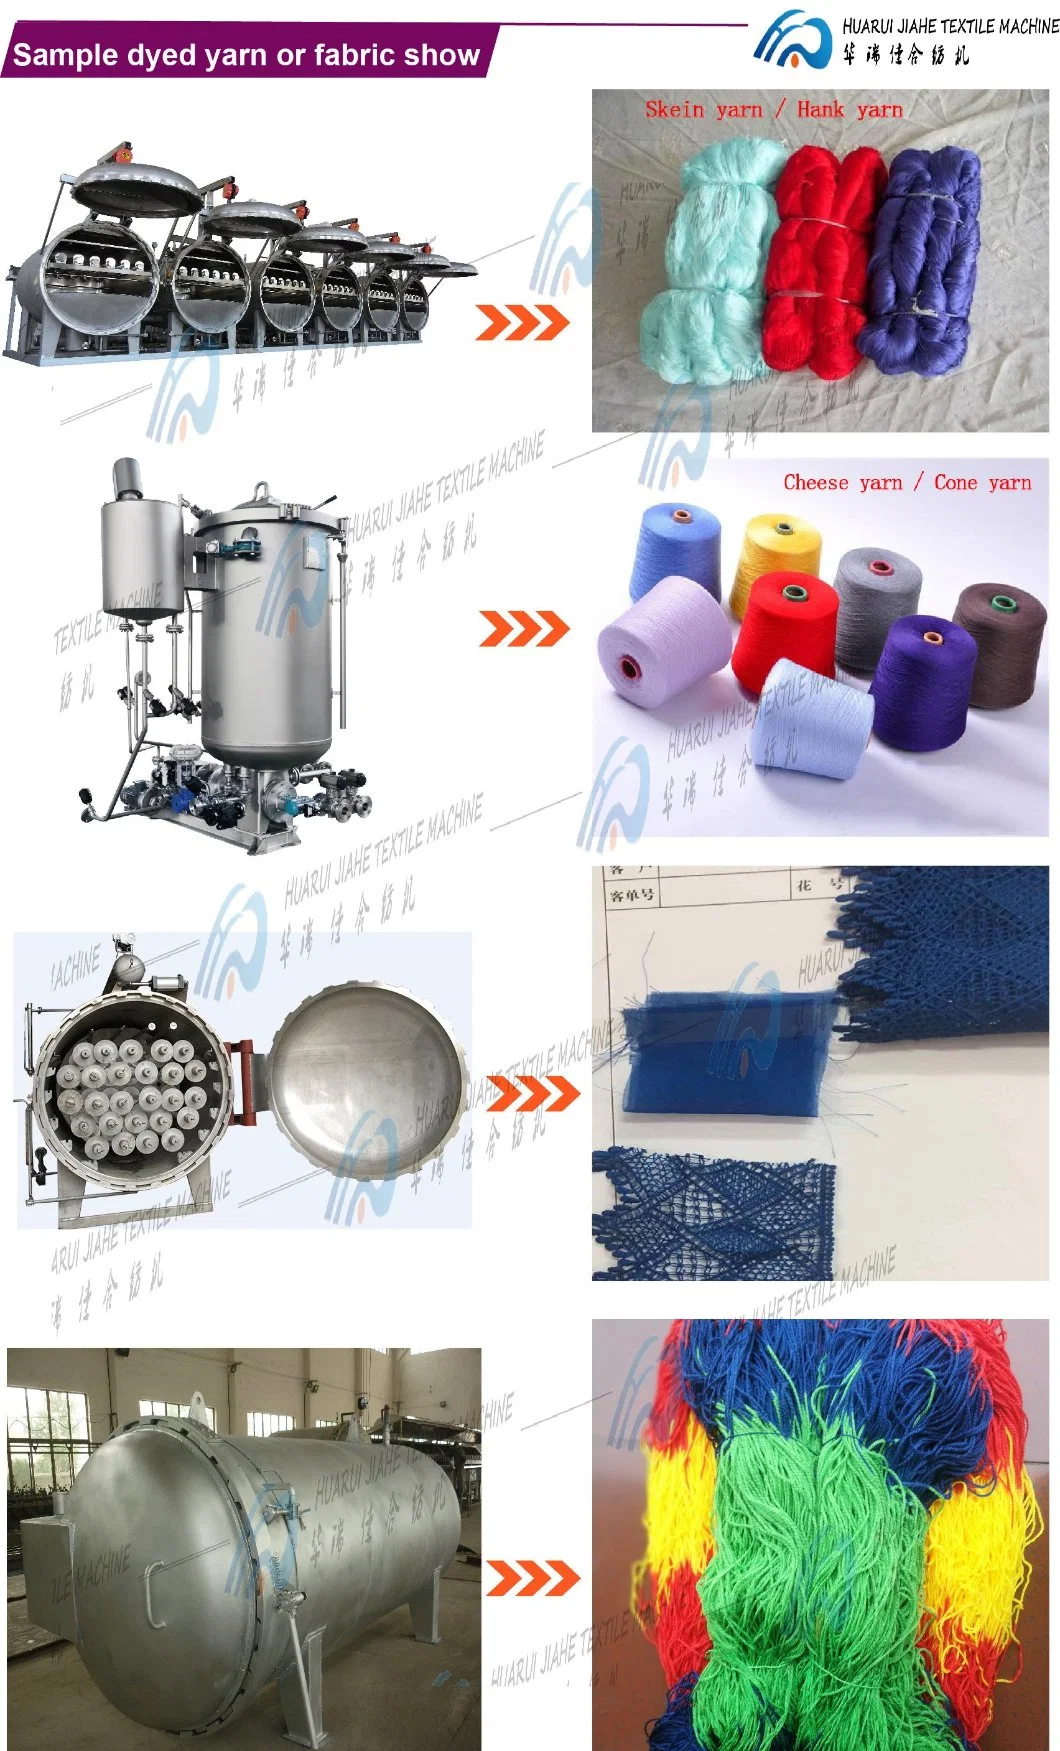 Factory Supplier Textile Manufacturer Jeans Cheese Dyeing Machine for Mills 7A Grade Hank Yarn Refined, Dyed and Washed Dryer Dyeing Machine with Certificate